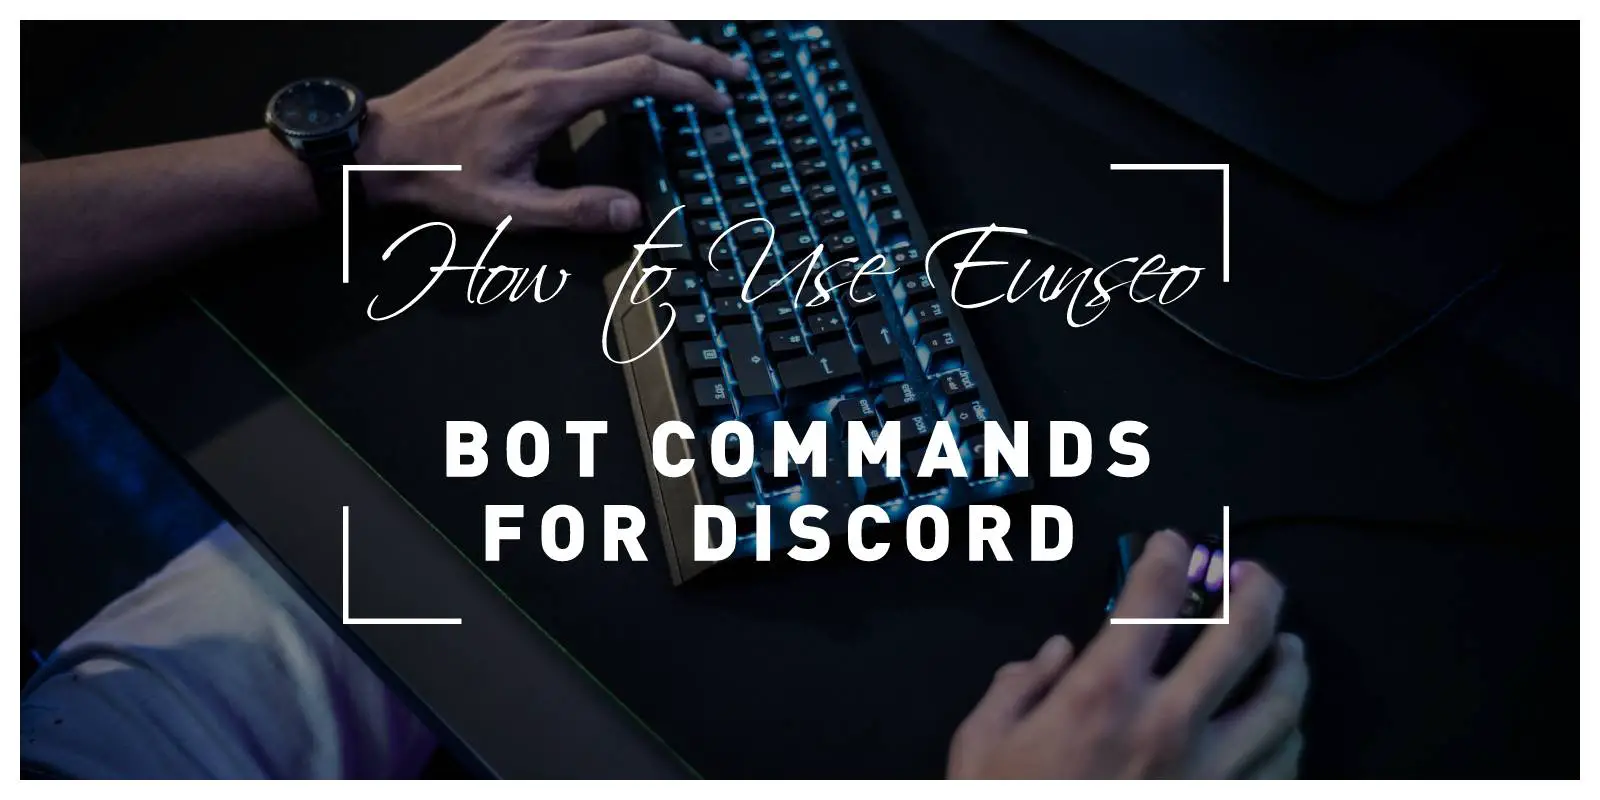 how to use eunseo bot commands for discord